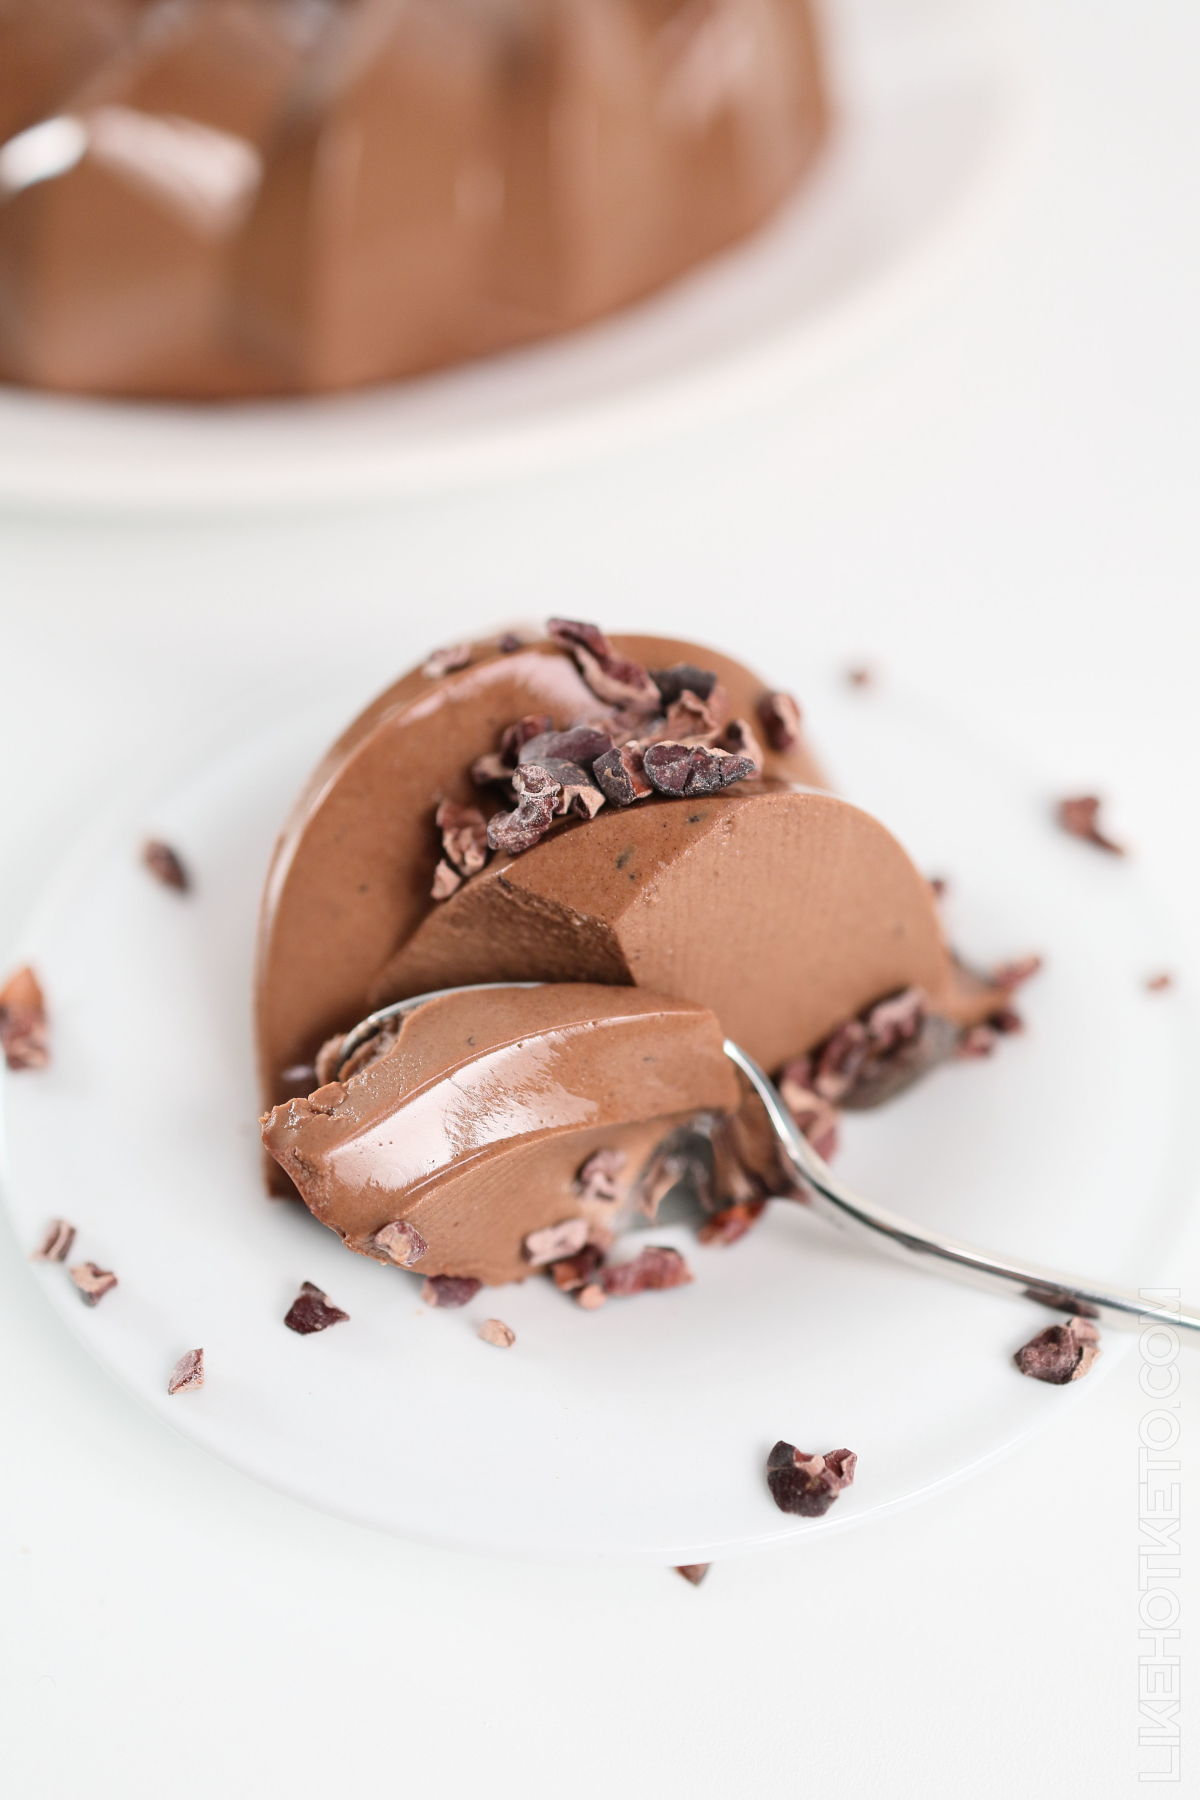 Chocolate jello getting sliced by spoon on a white plate.